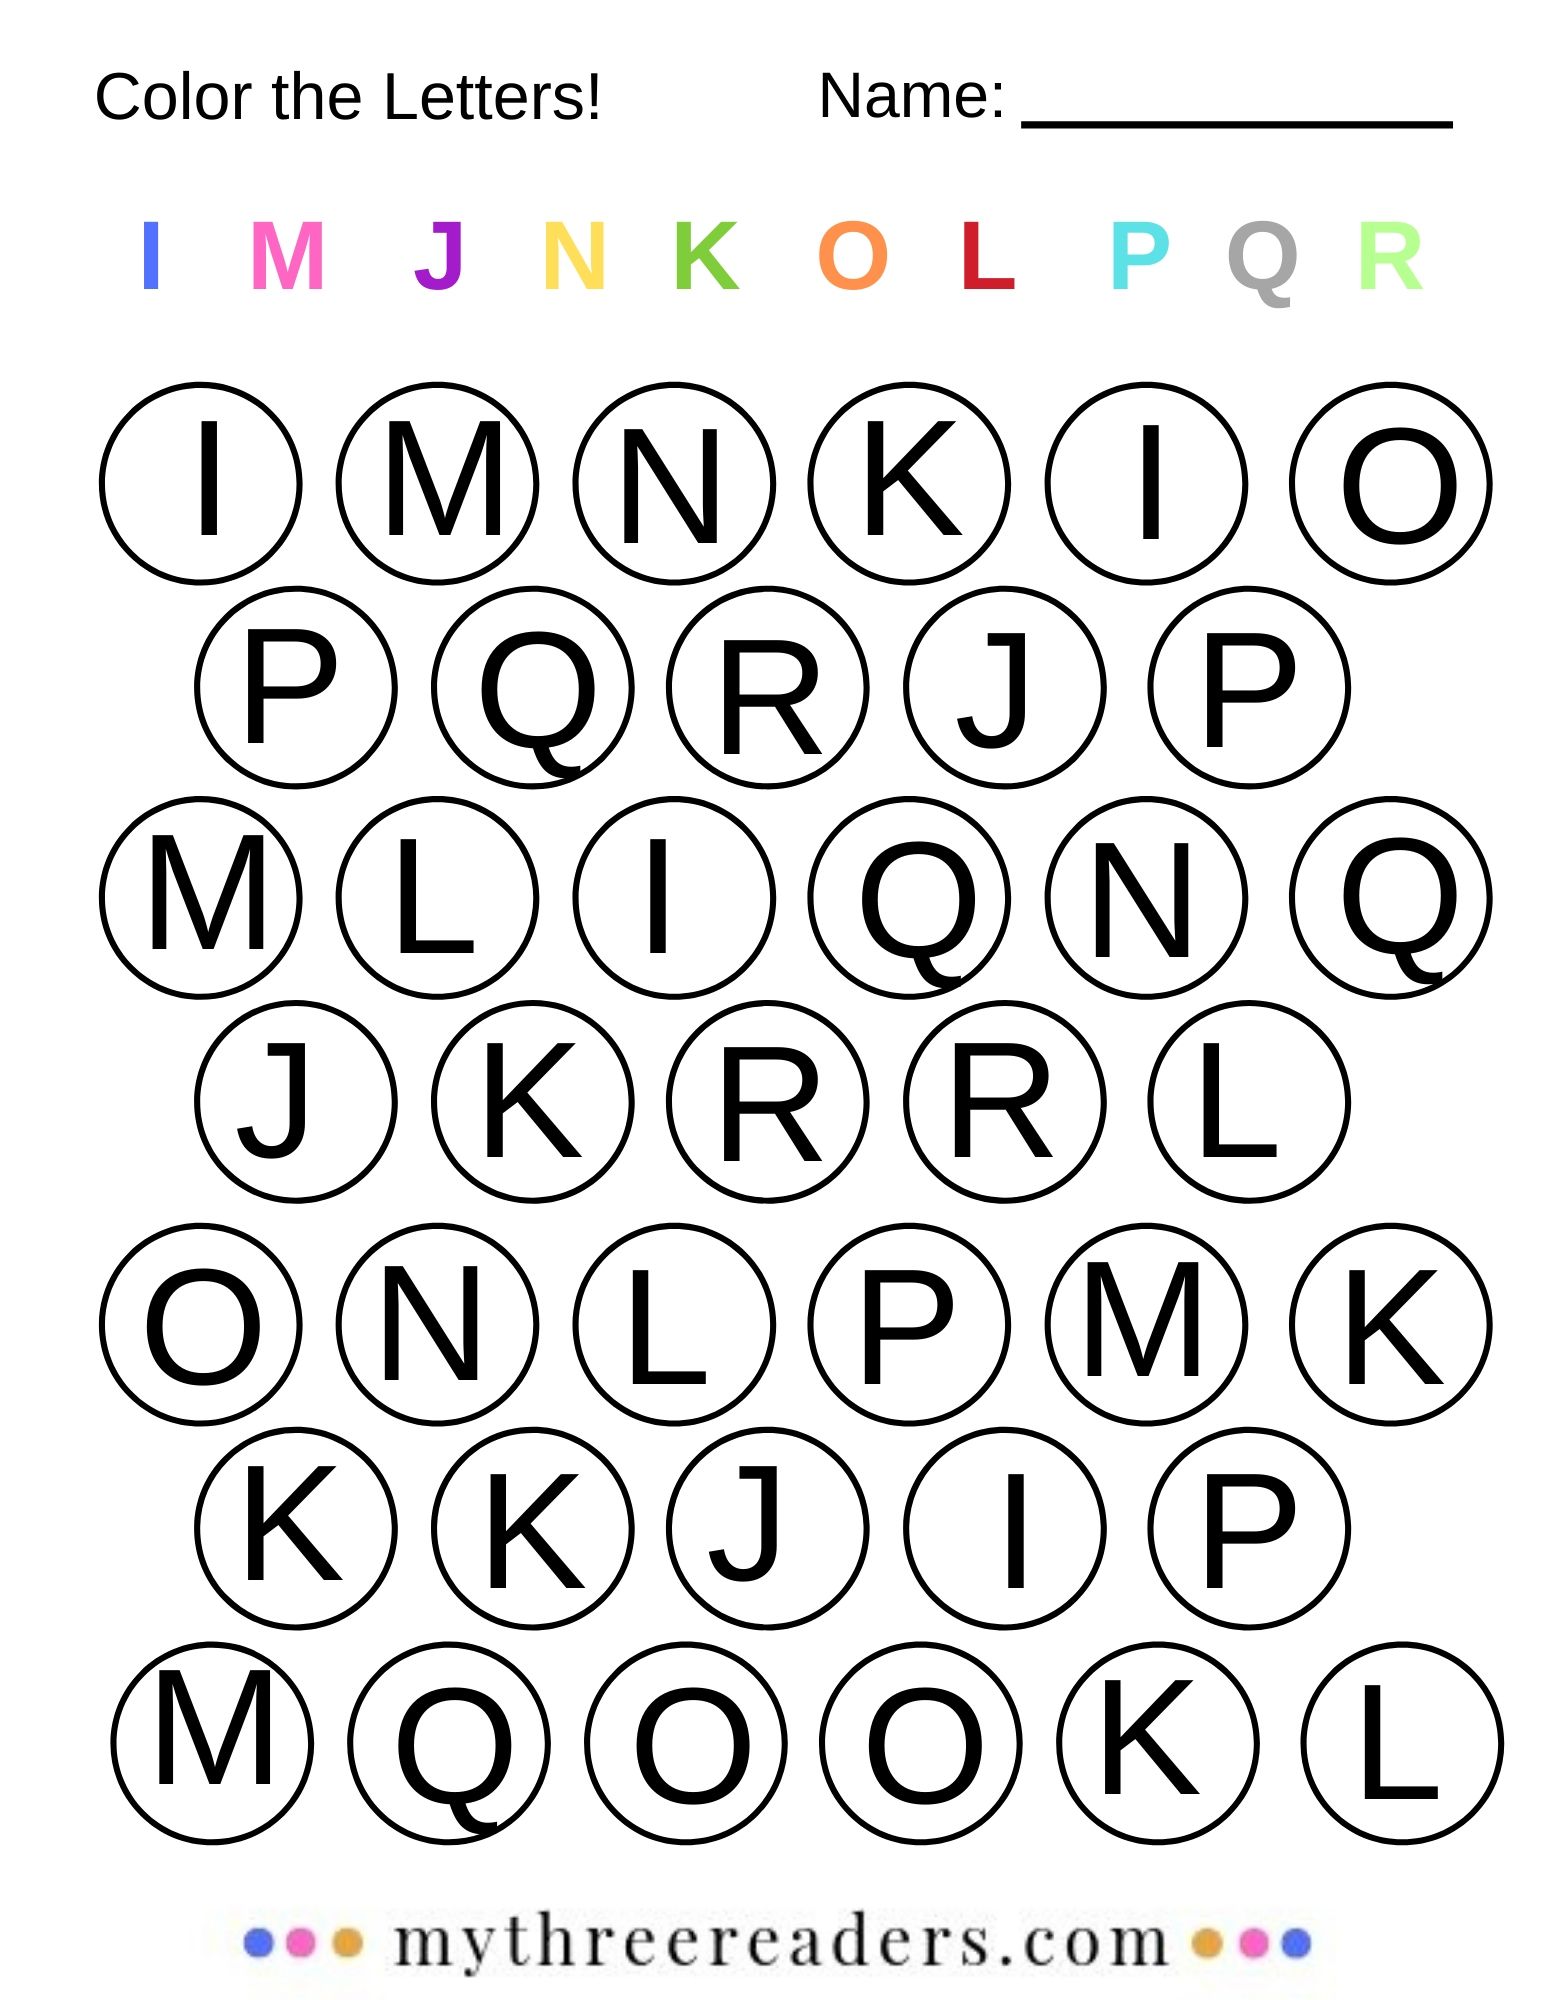 Color the Letters!3